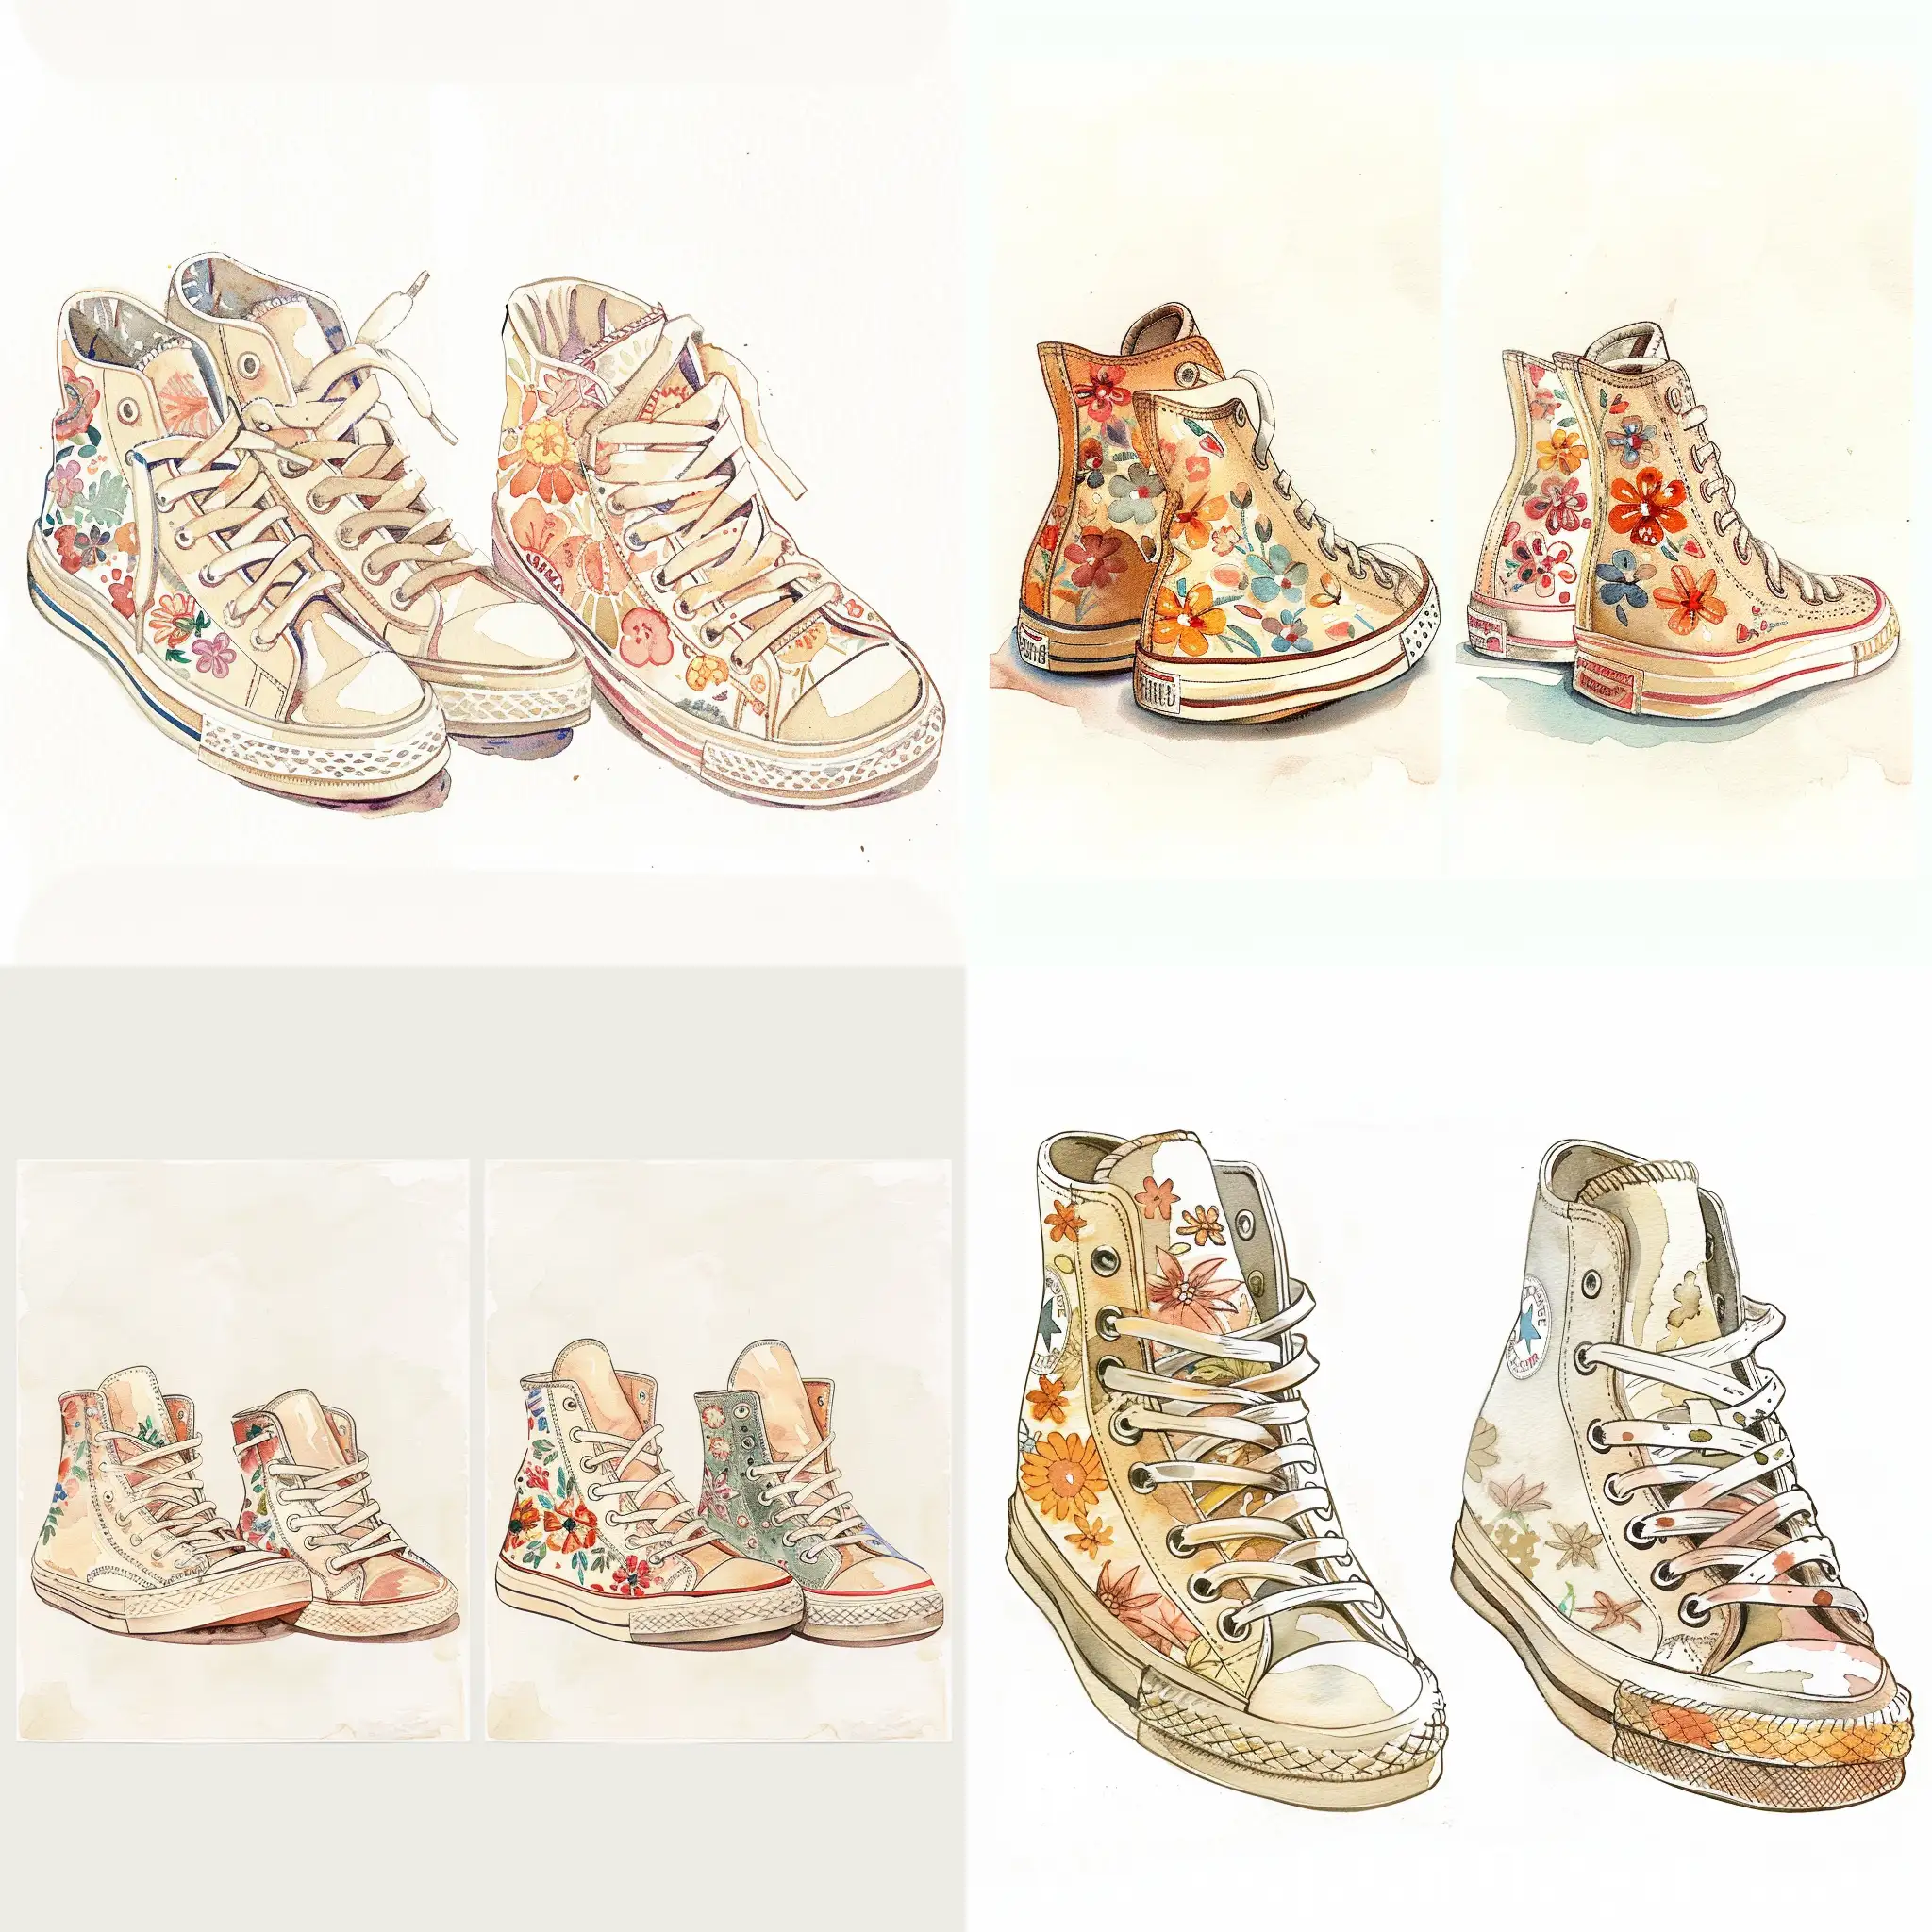 VintageInspired-Watercolor-Illustrations-of-Floral-Patterned-Sneakers